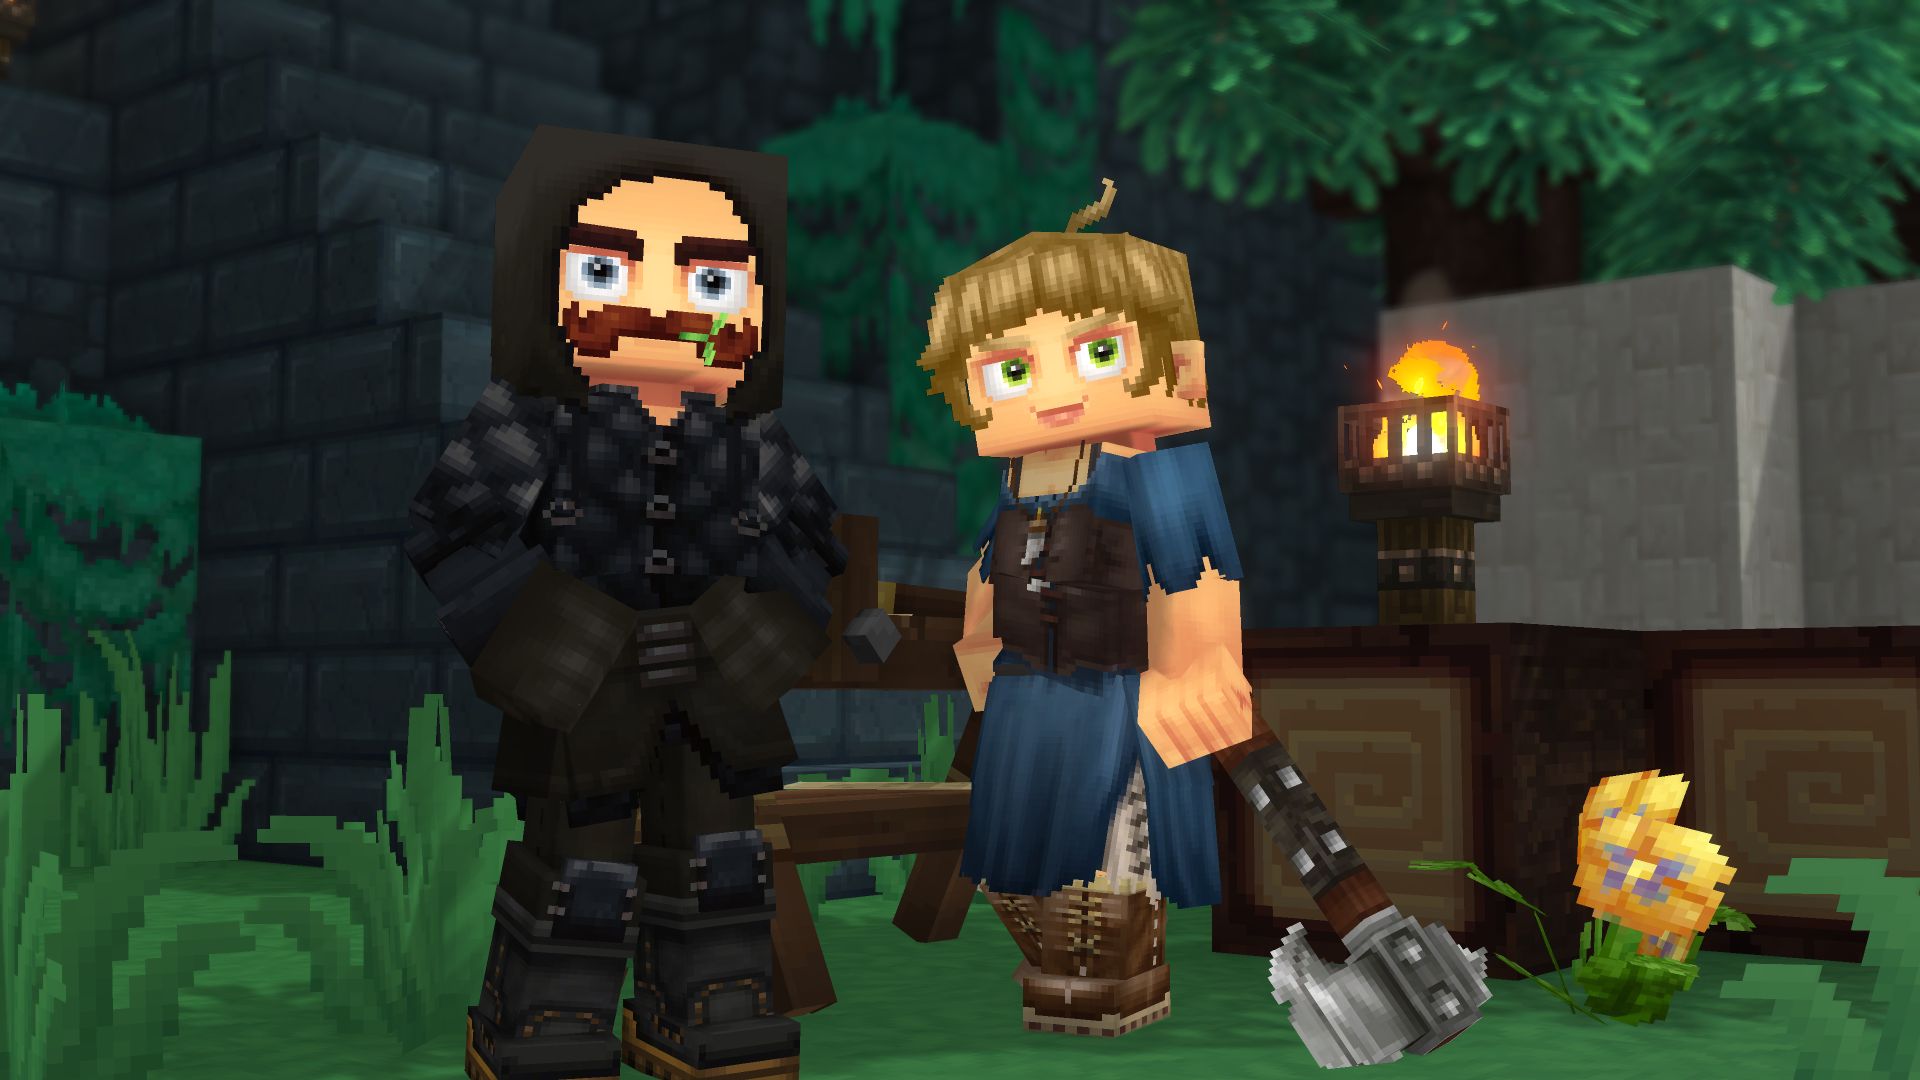 Hytale will feature in-depth character customization and poop-flinging